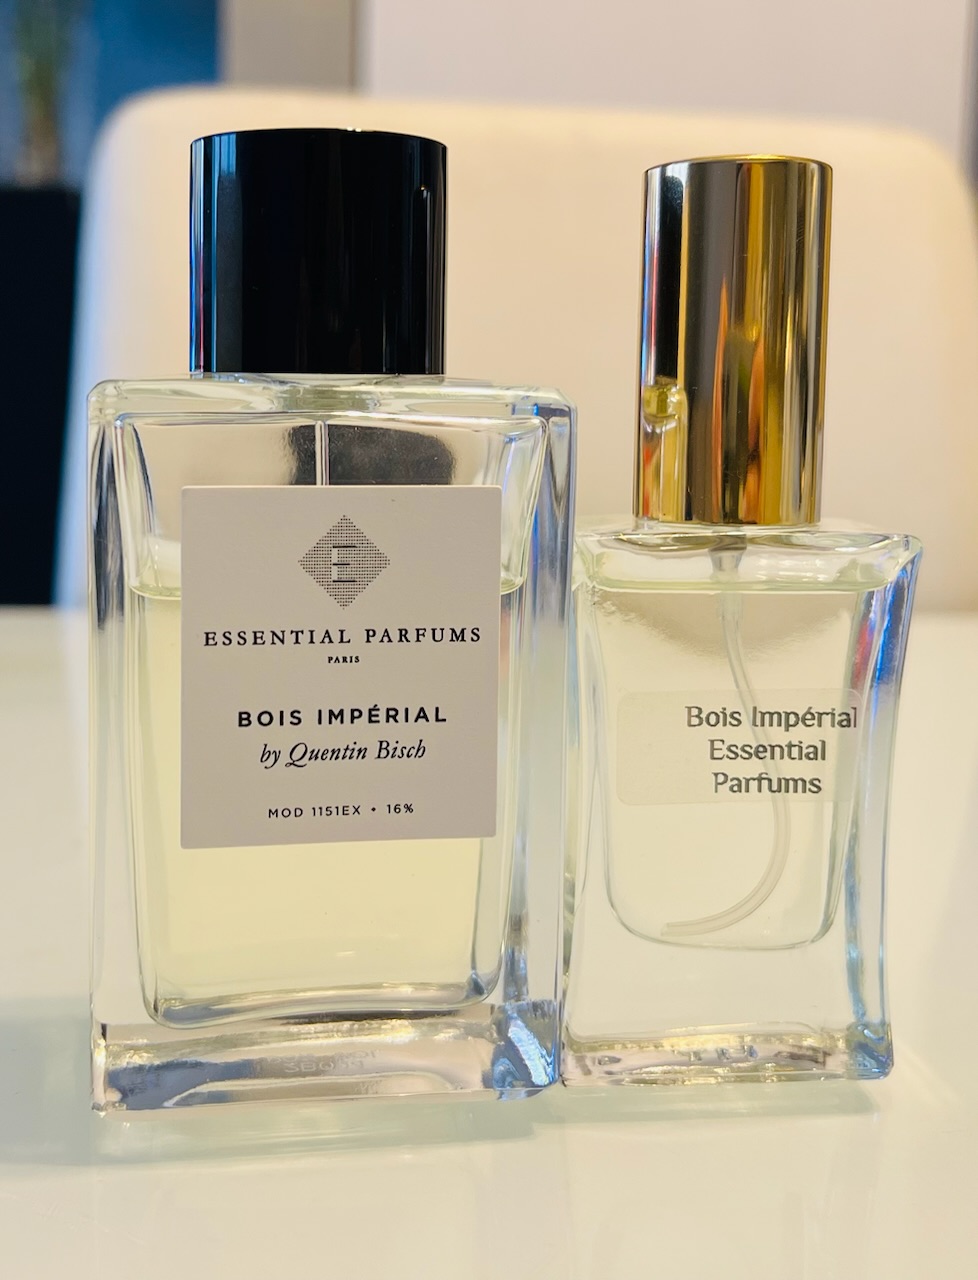 Bois imperial essential parfums limited edition. Essential Parfums bois Imperial. Essential Parfums bois Imperial 10 ml. Essential Parfums Paris bois Imperial by Quentin bisch. Essential Parfums bois Imperial 25 мл.